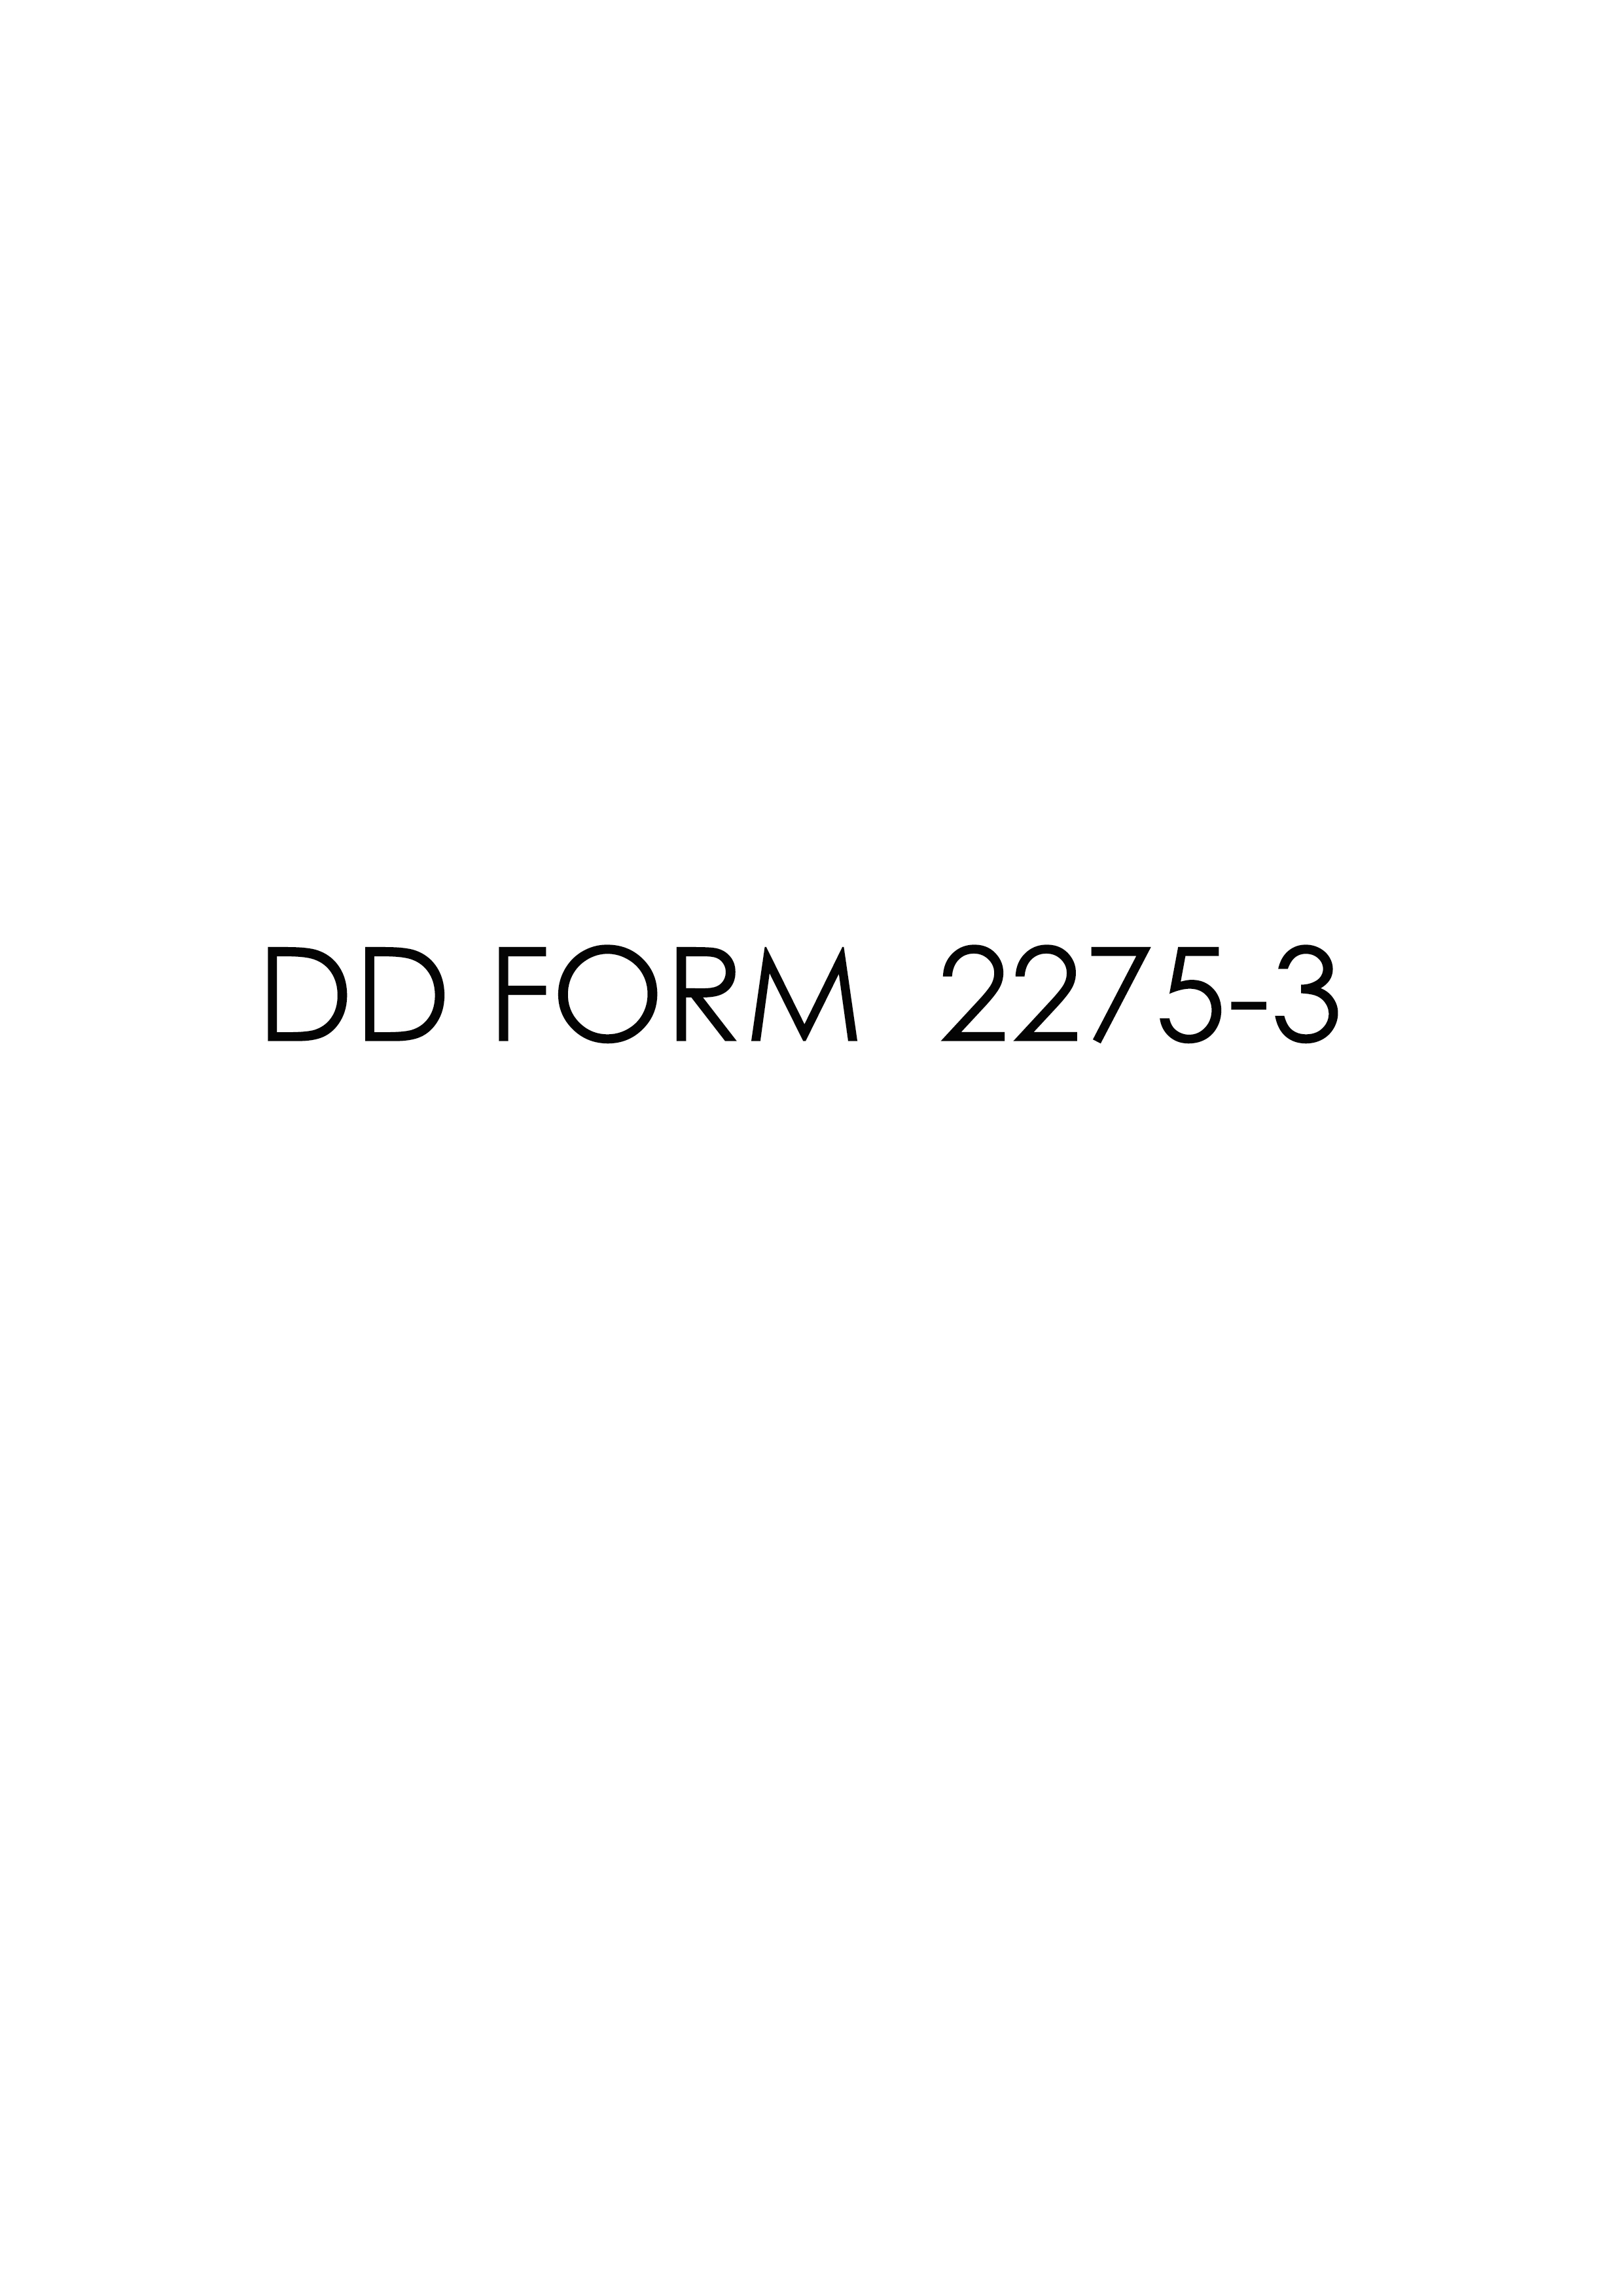 Download Fillable dd Form 2275-3